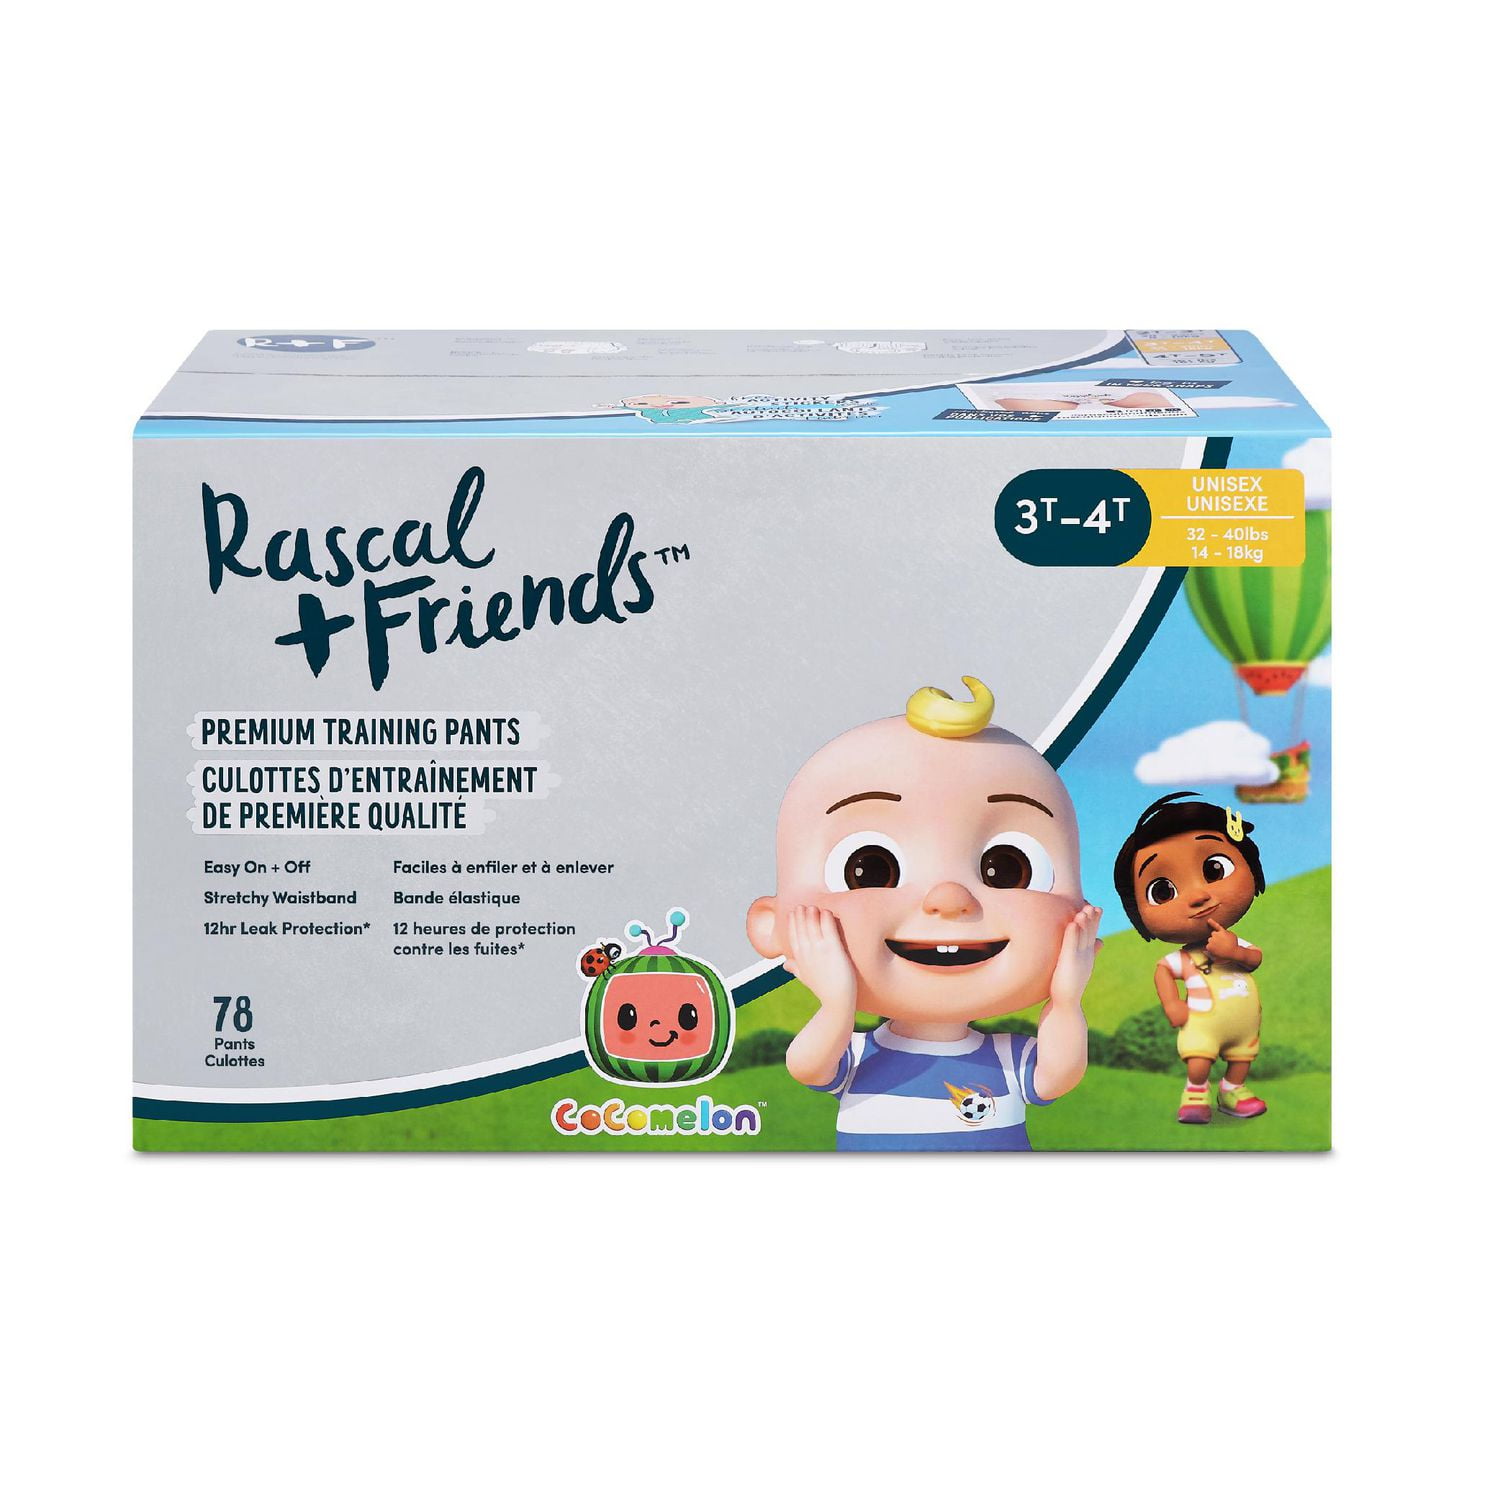 Rascal + Friends: Size Guide  Premium Diapers & Training Pants